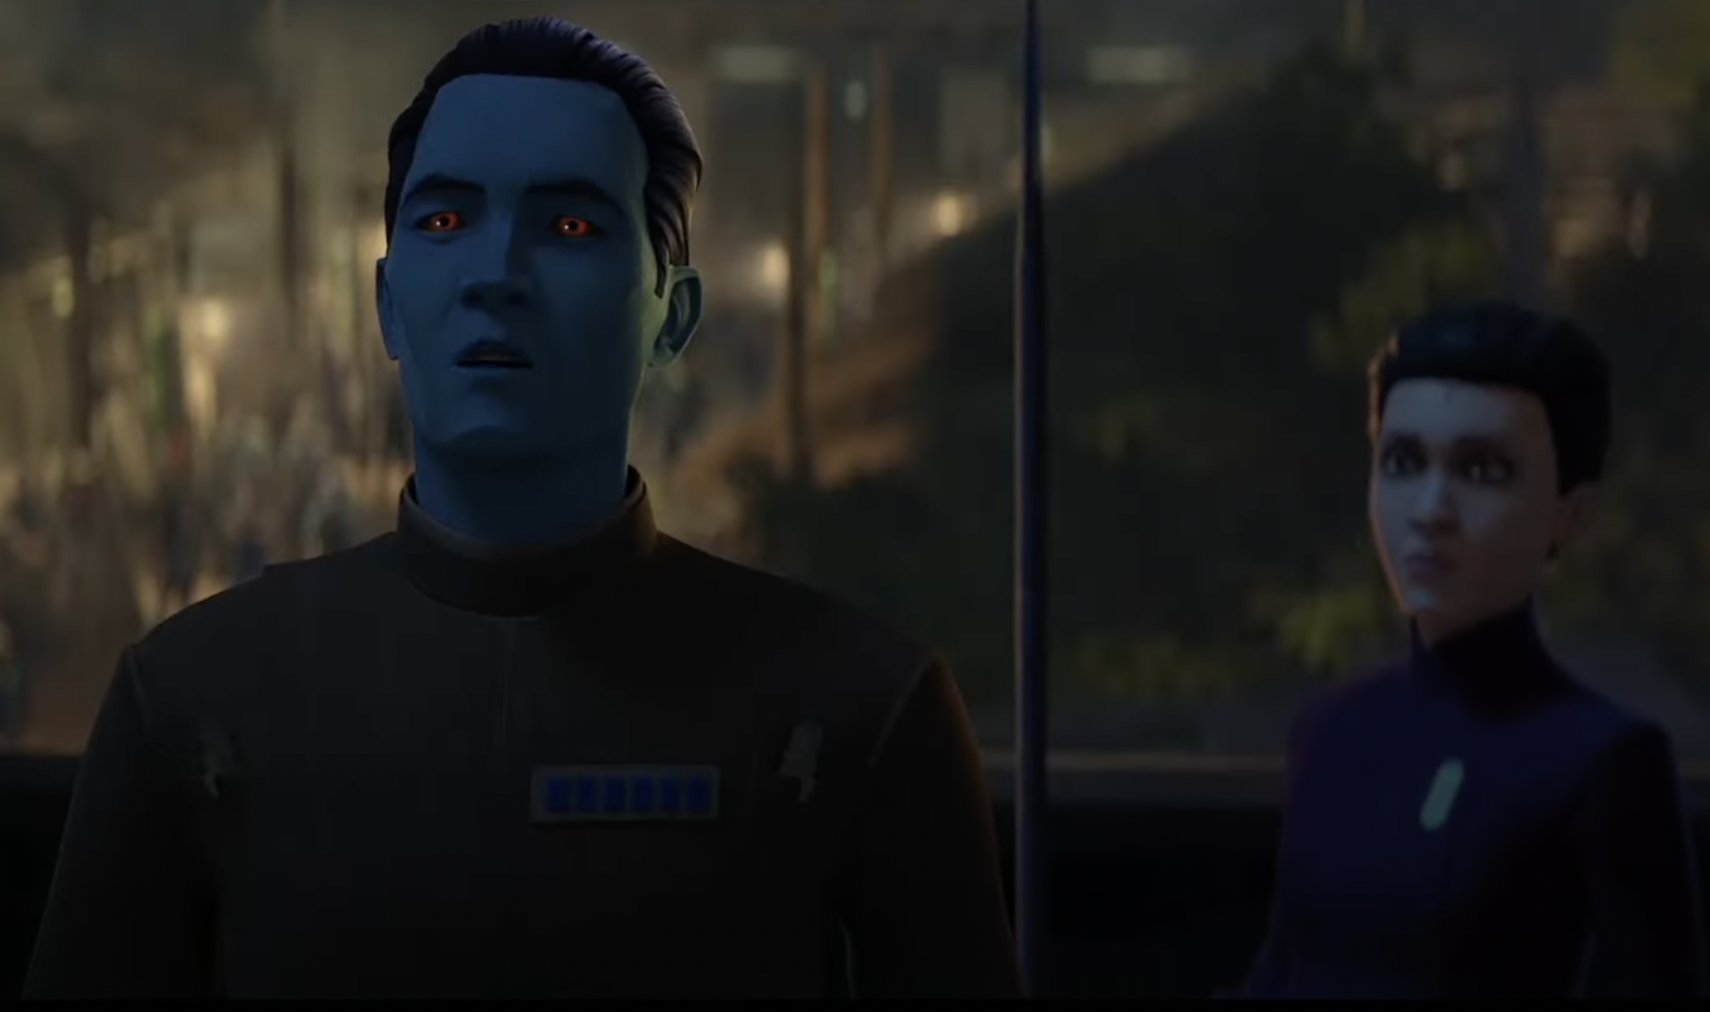 Review: ‘Tales of the Empire’ Season 1 Episode 2 “The Path of Anger”